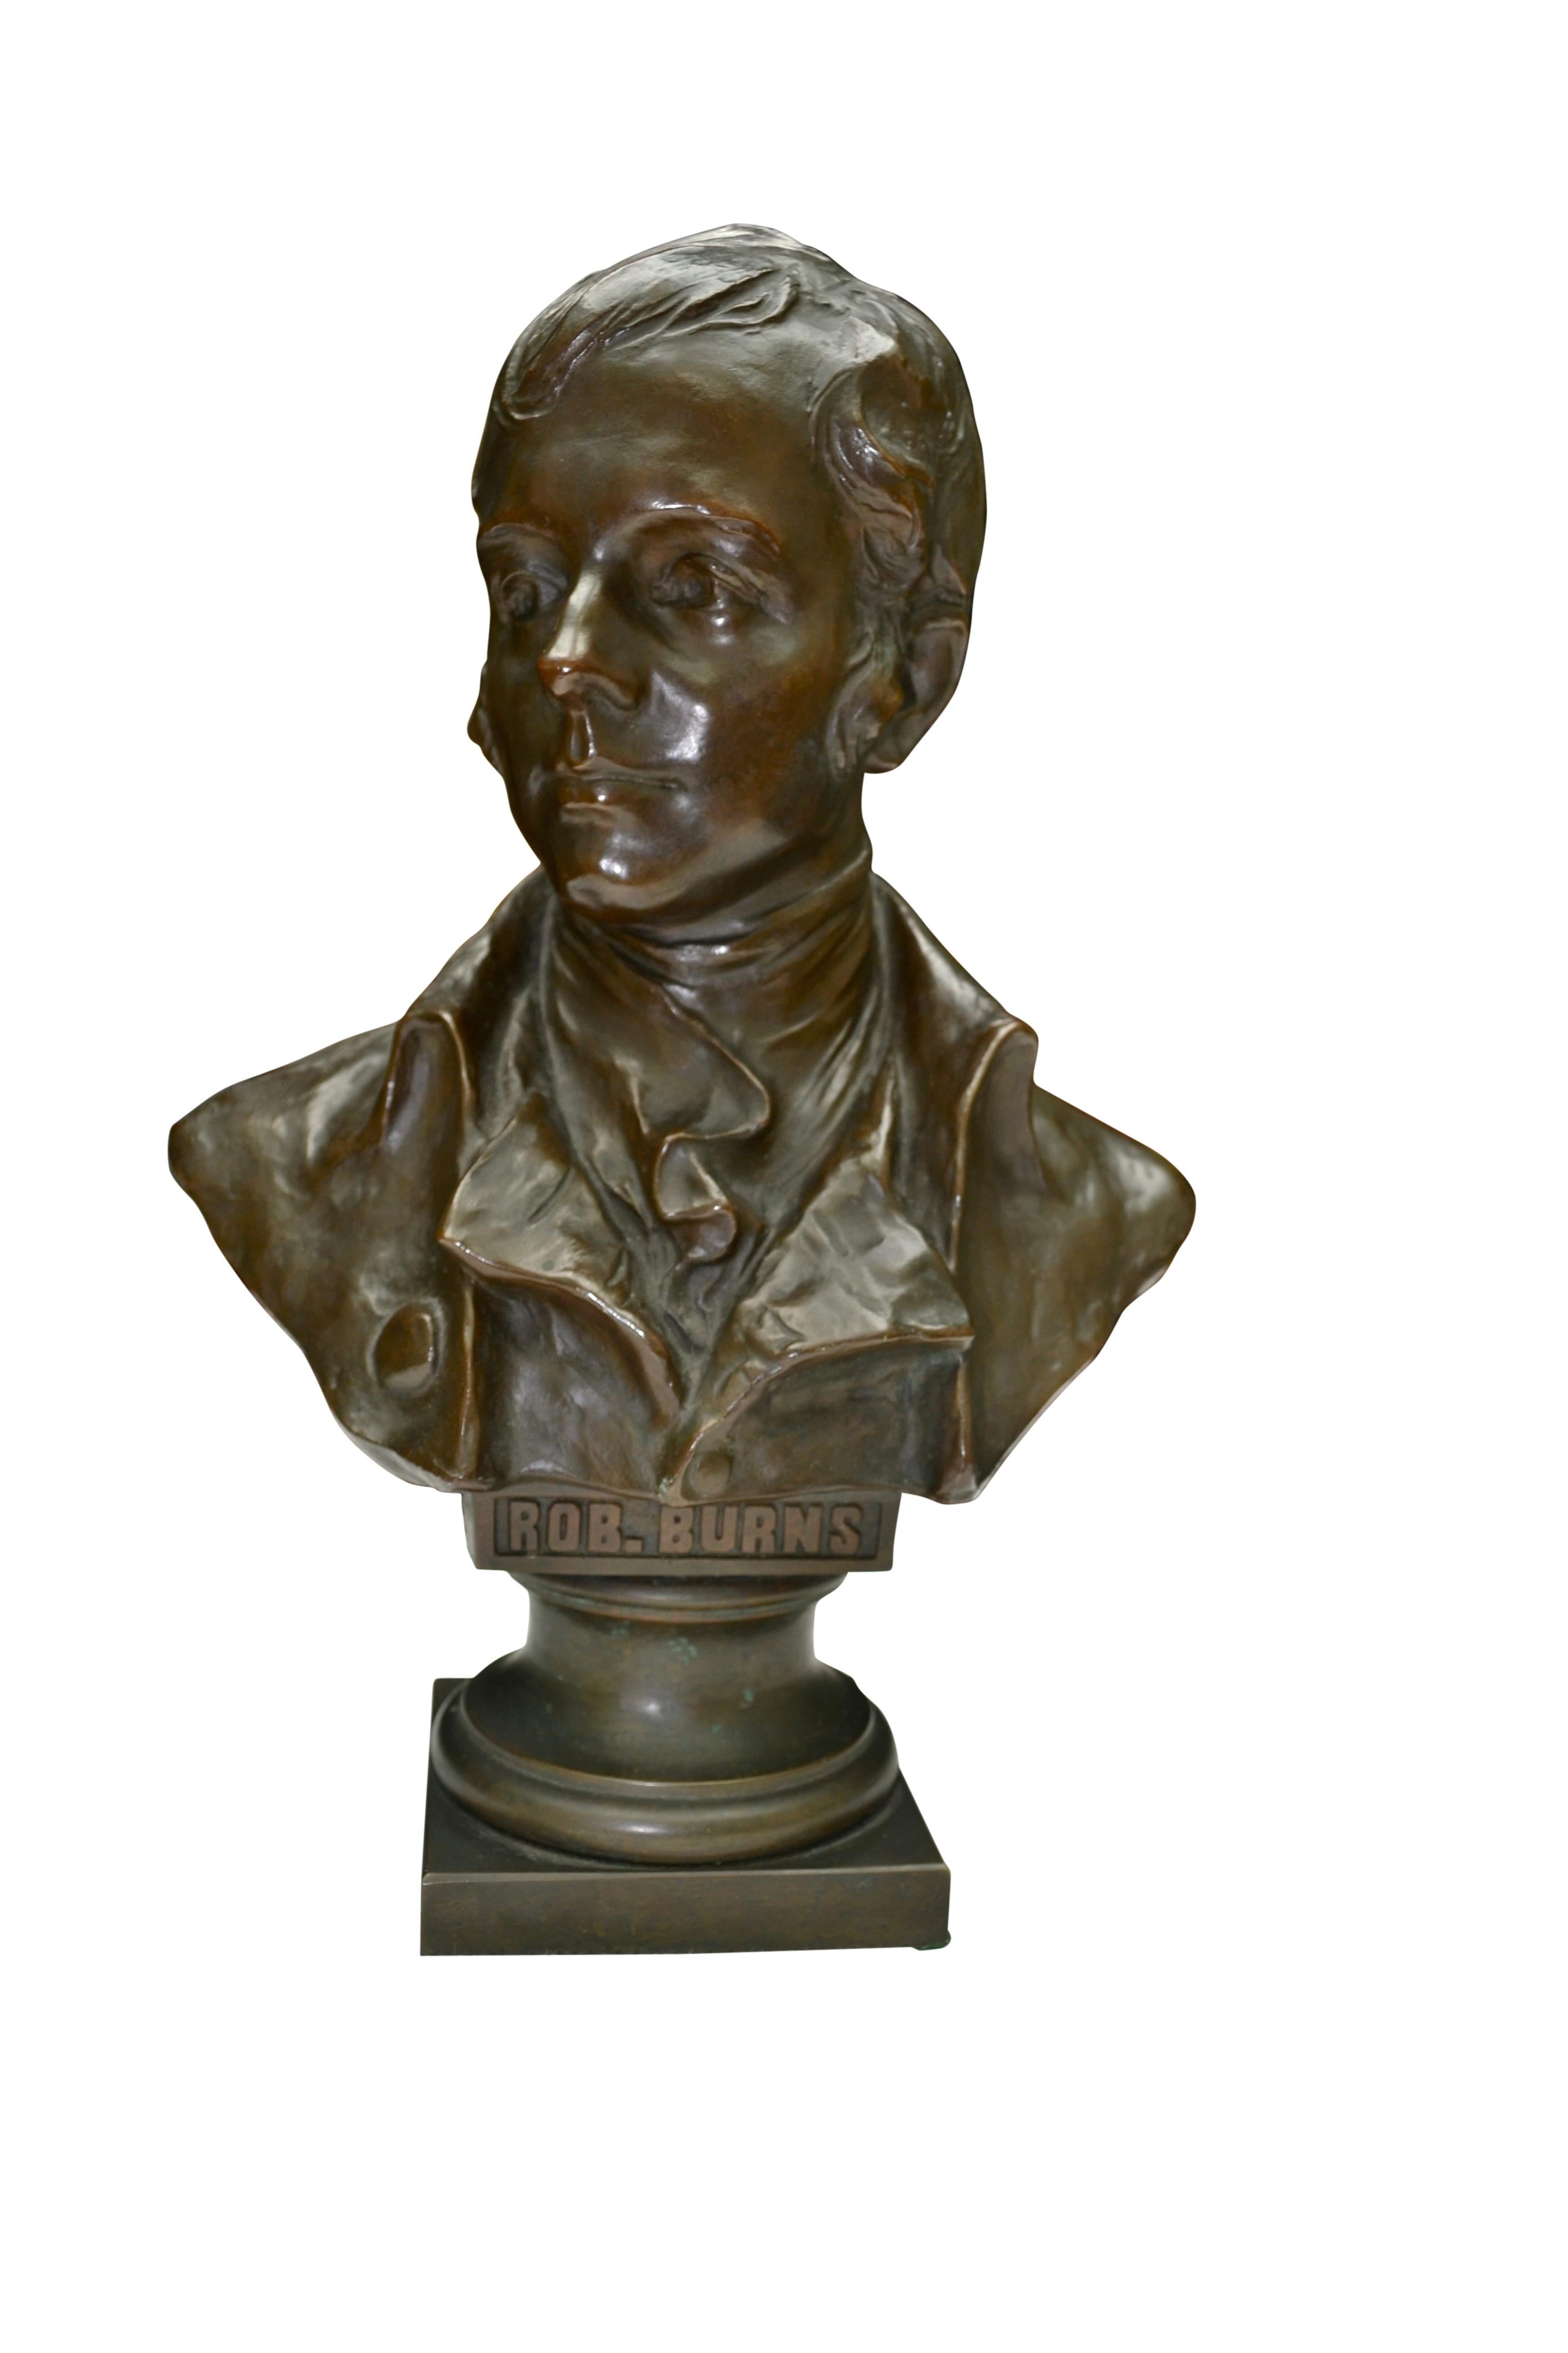 A small cast brown patinated bronze of Scottish National Poet Robert Burns in the Art Nouveau style showing his head, shoulders and waistcoat. Signed on the verso; H. Muller for Hans Muller; Rob. Burns inscribed at the base.

The sculptor Hans